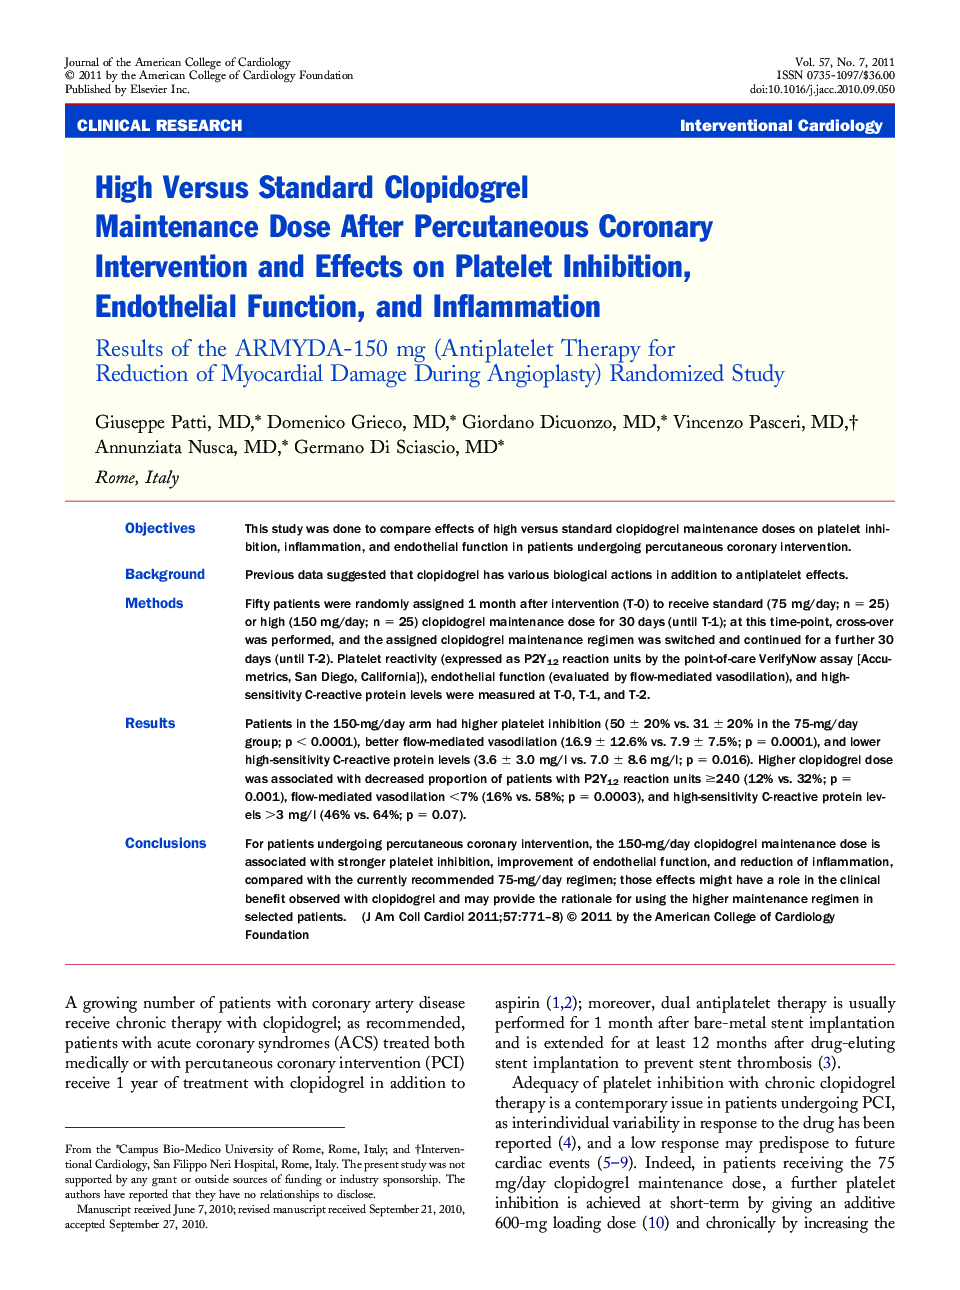 High Versus Standard Clopidogrel Maintenance Dose After Percutaneous Coronary Intervention and Effects on Platelet Inhibition, Endothelial Function, and Inflammation : Results of the ARMYDA-150 mg (Antiplatelet Therapy for Reduction of Myocardial Damage D